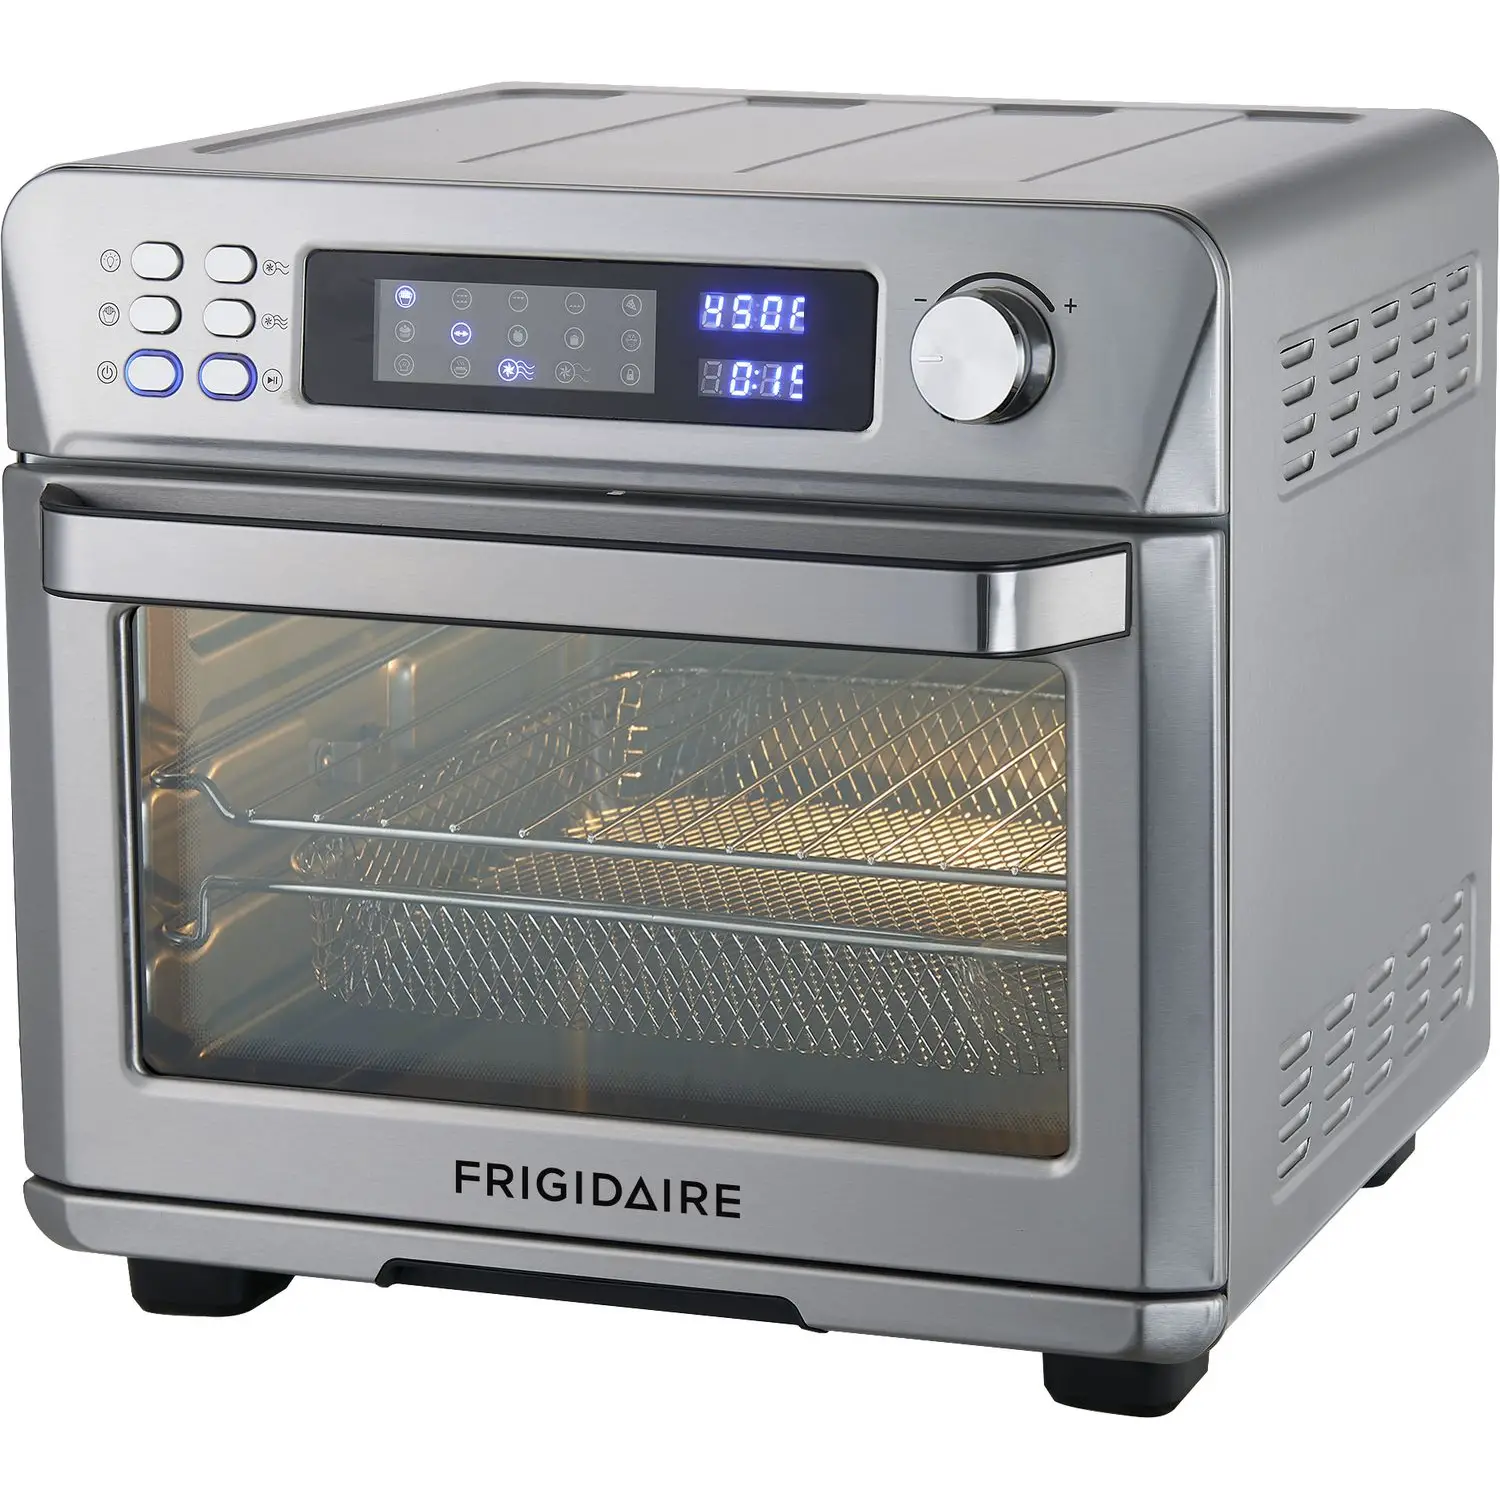 Frigidaire Digital Air Fryer Toaster Oven with 11 Functions 27QT ...